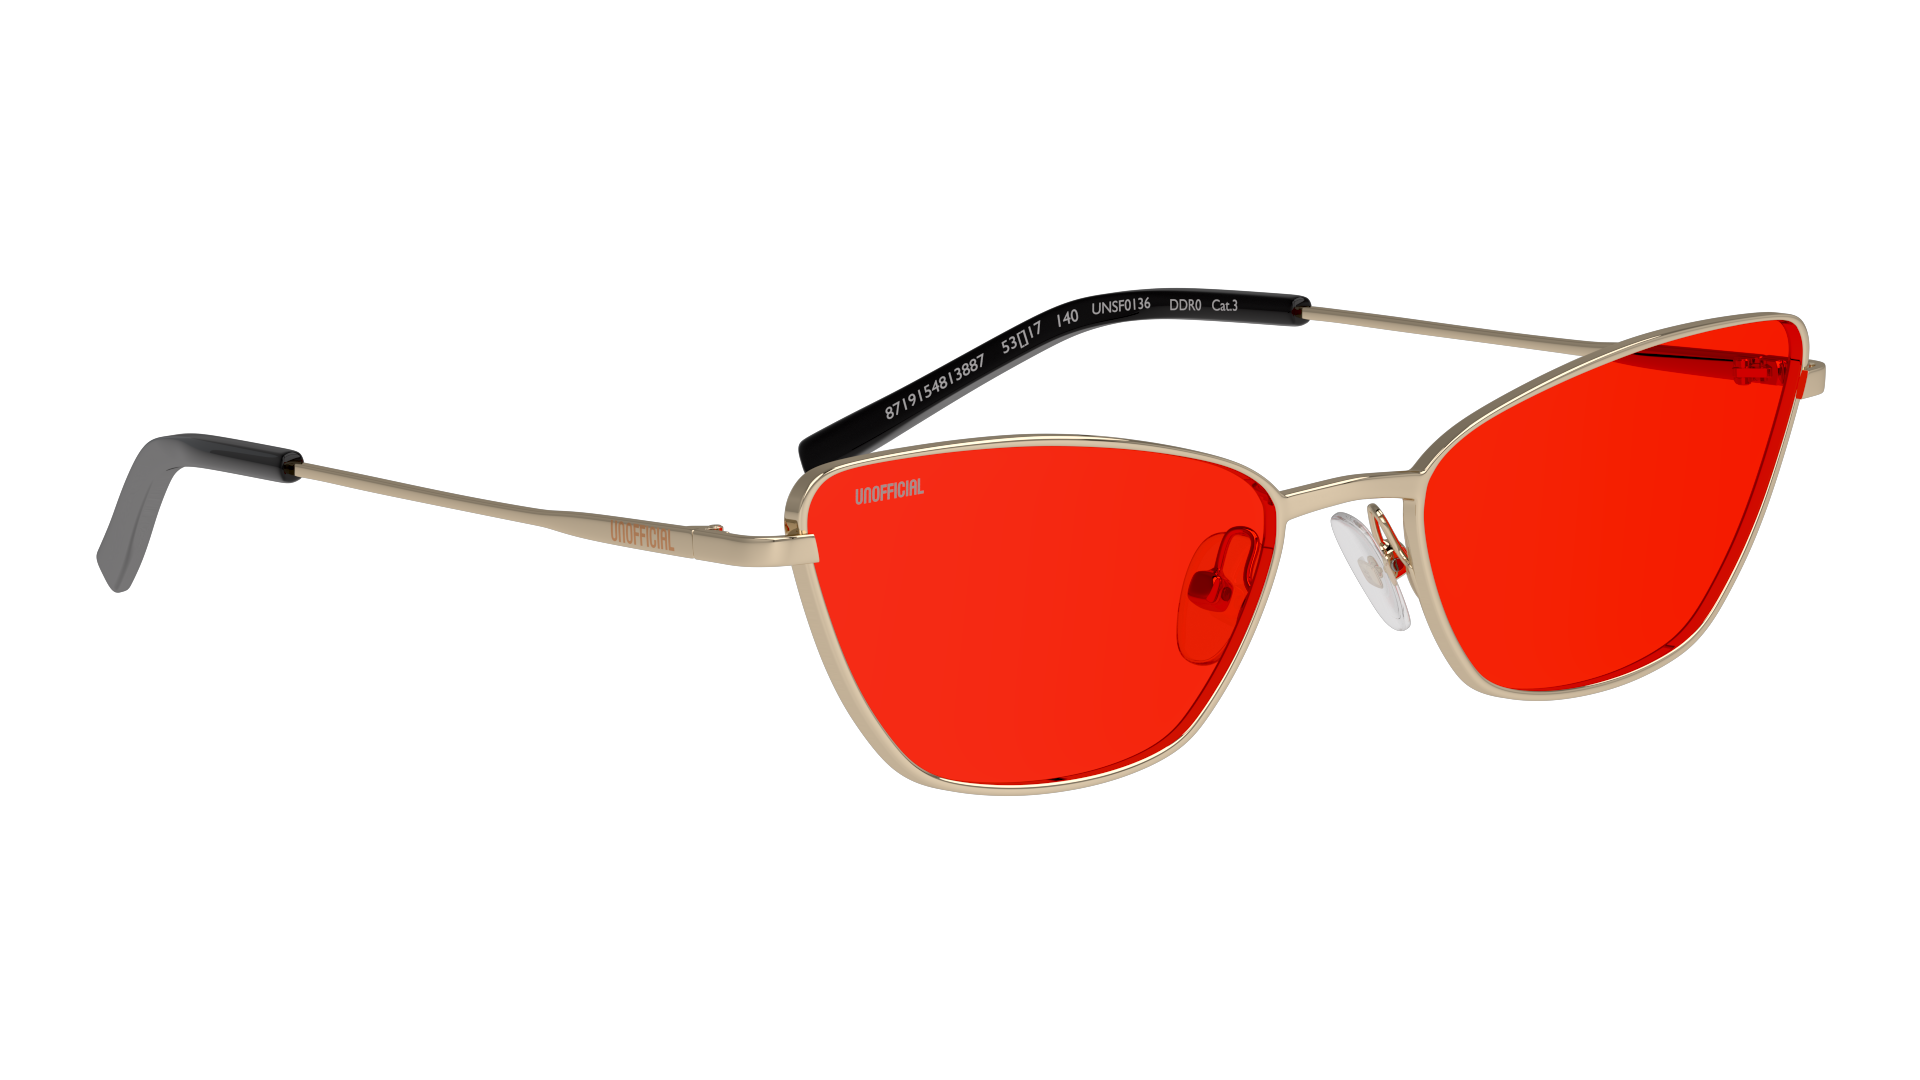 Angle_Right01 Unofficial UNSF0136 Sunglasses Red / Gold